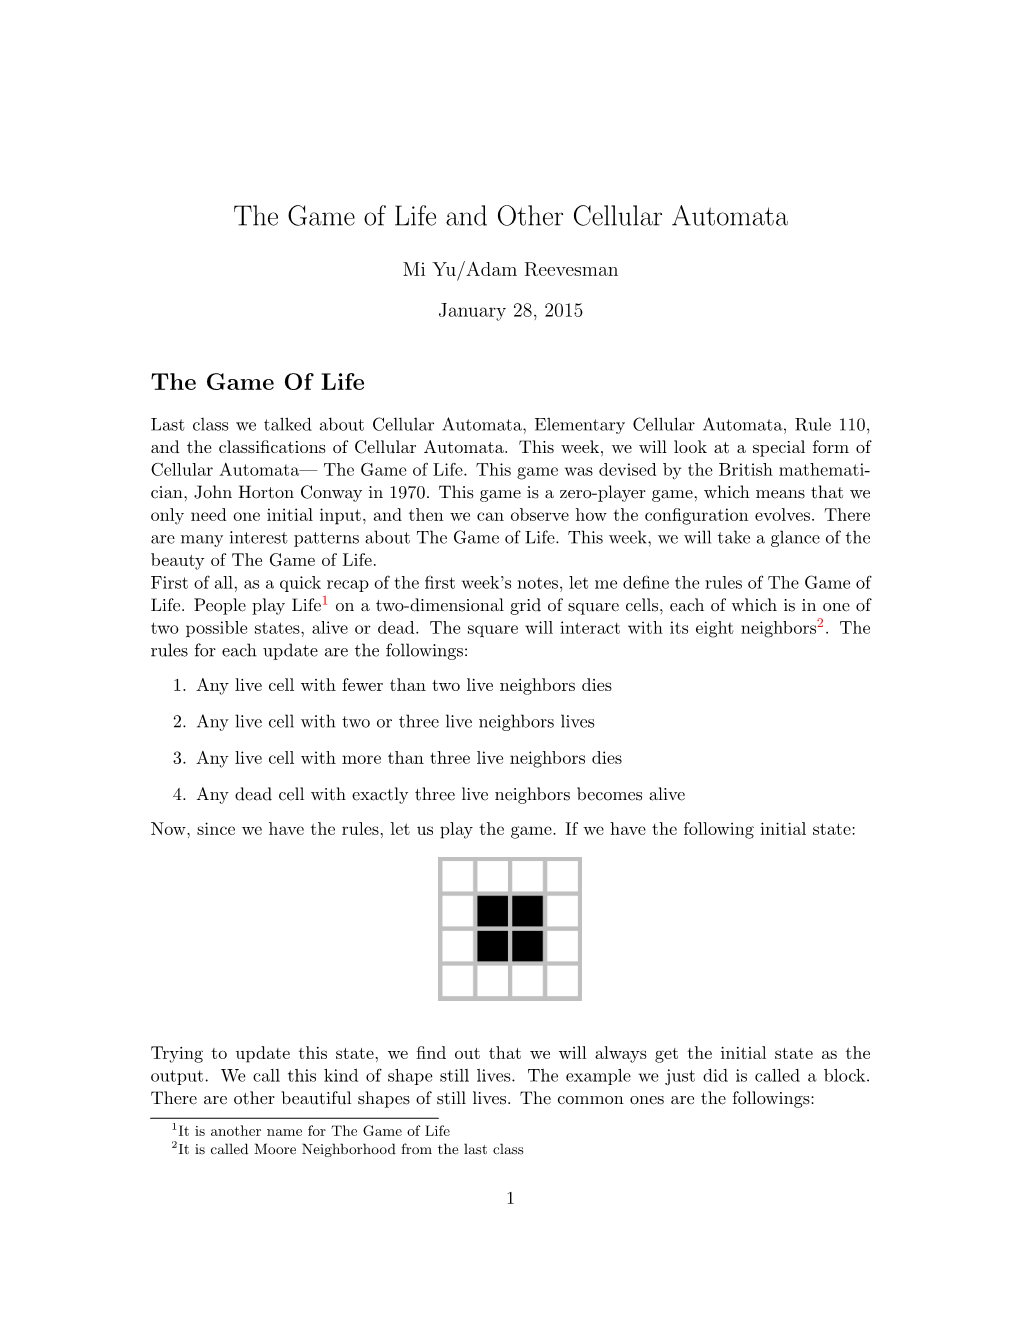 The Game of Life and Other Cellular Automata